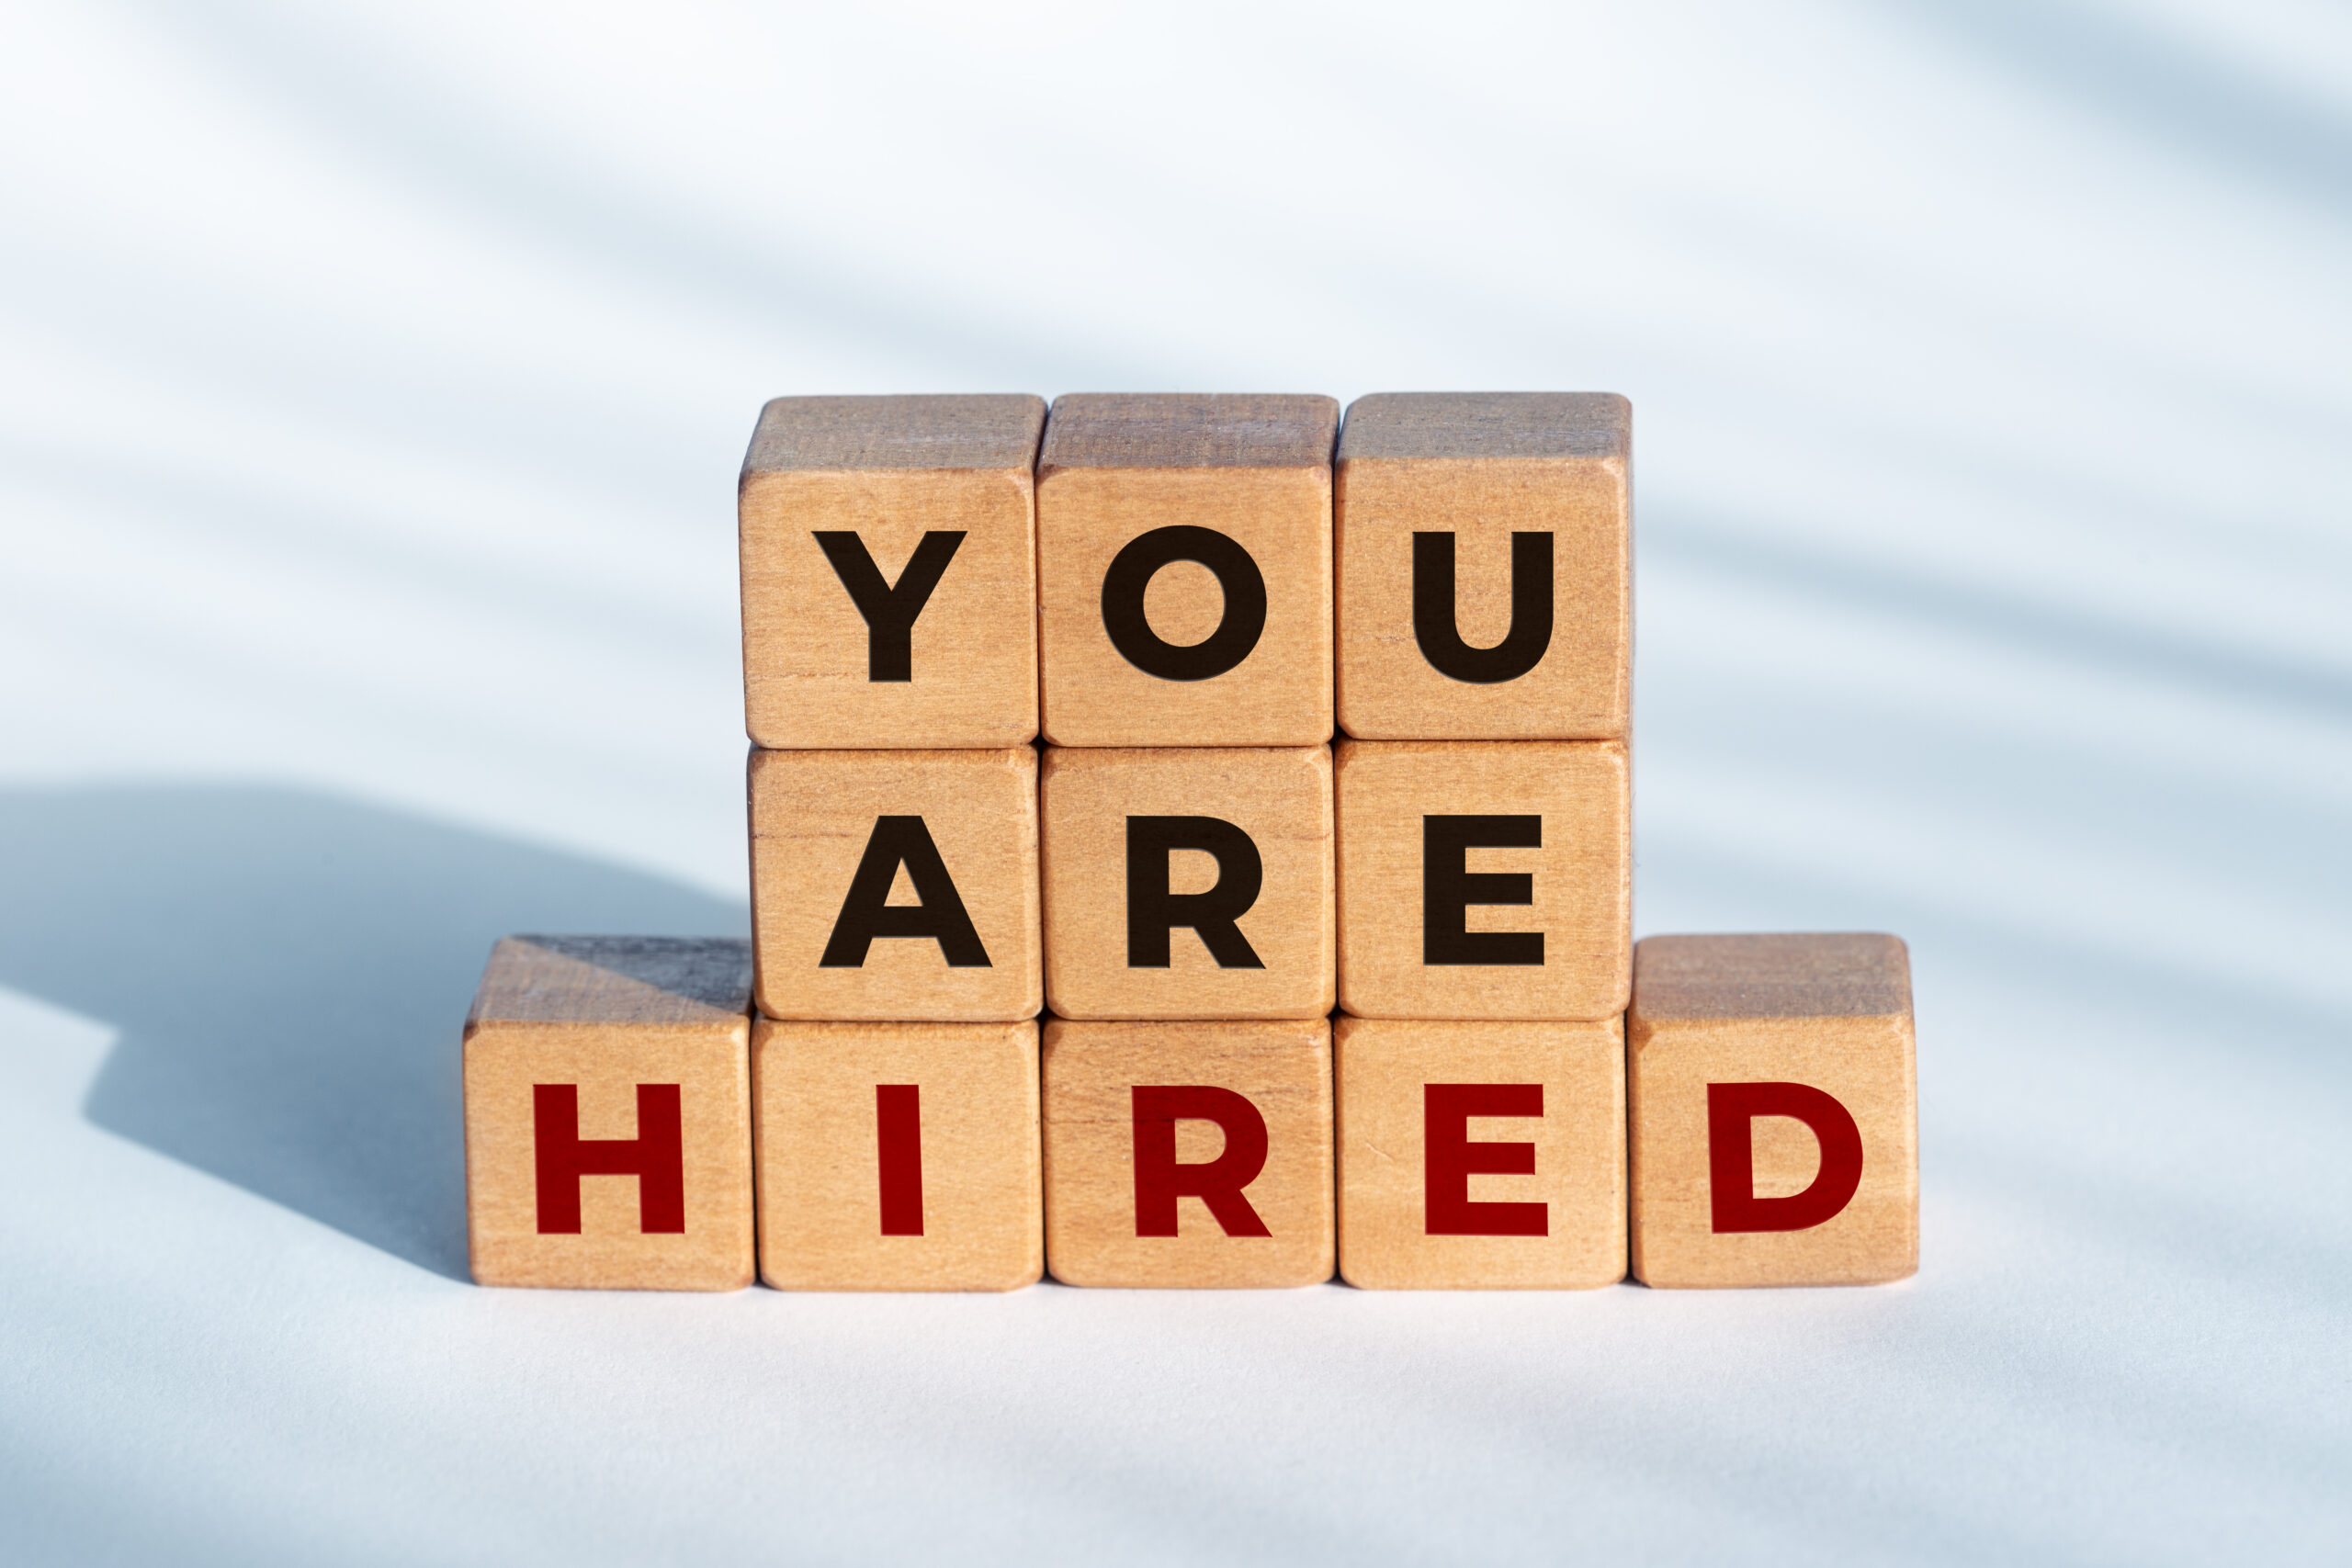 The letter blocks composed the phrase "You are hired".